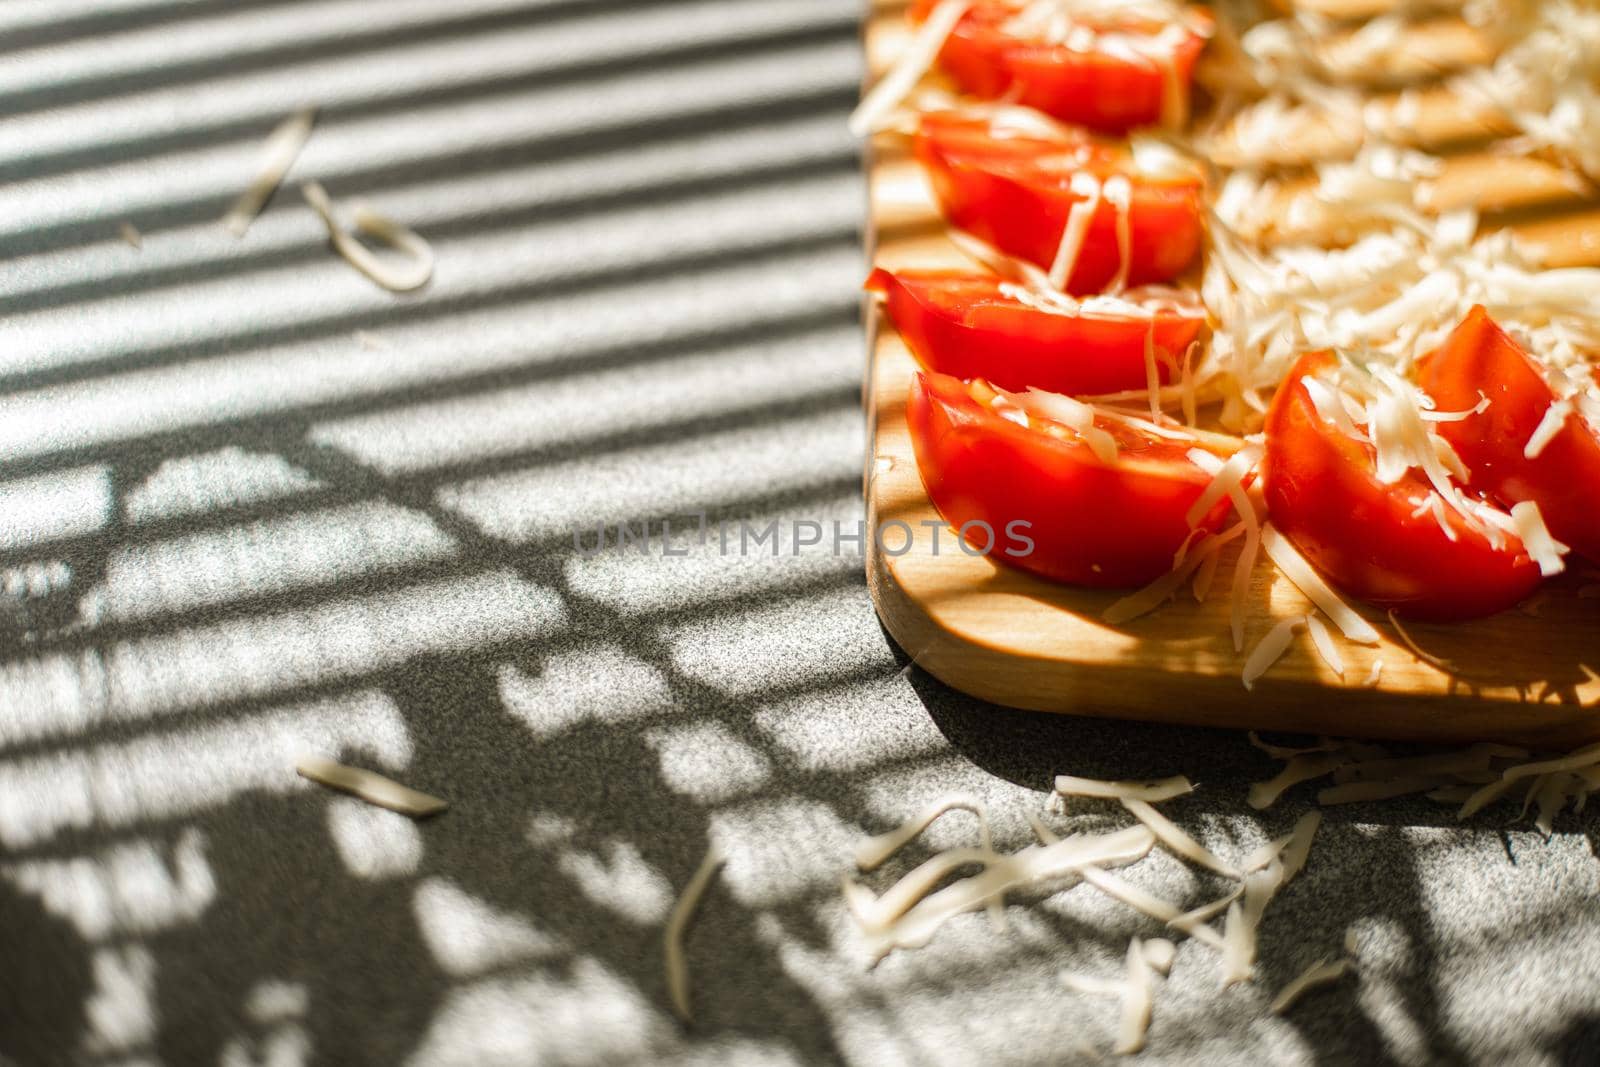 A small pile of grated fresh cheese and red tomatoes lies on a wooden board in the kitchen.